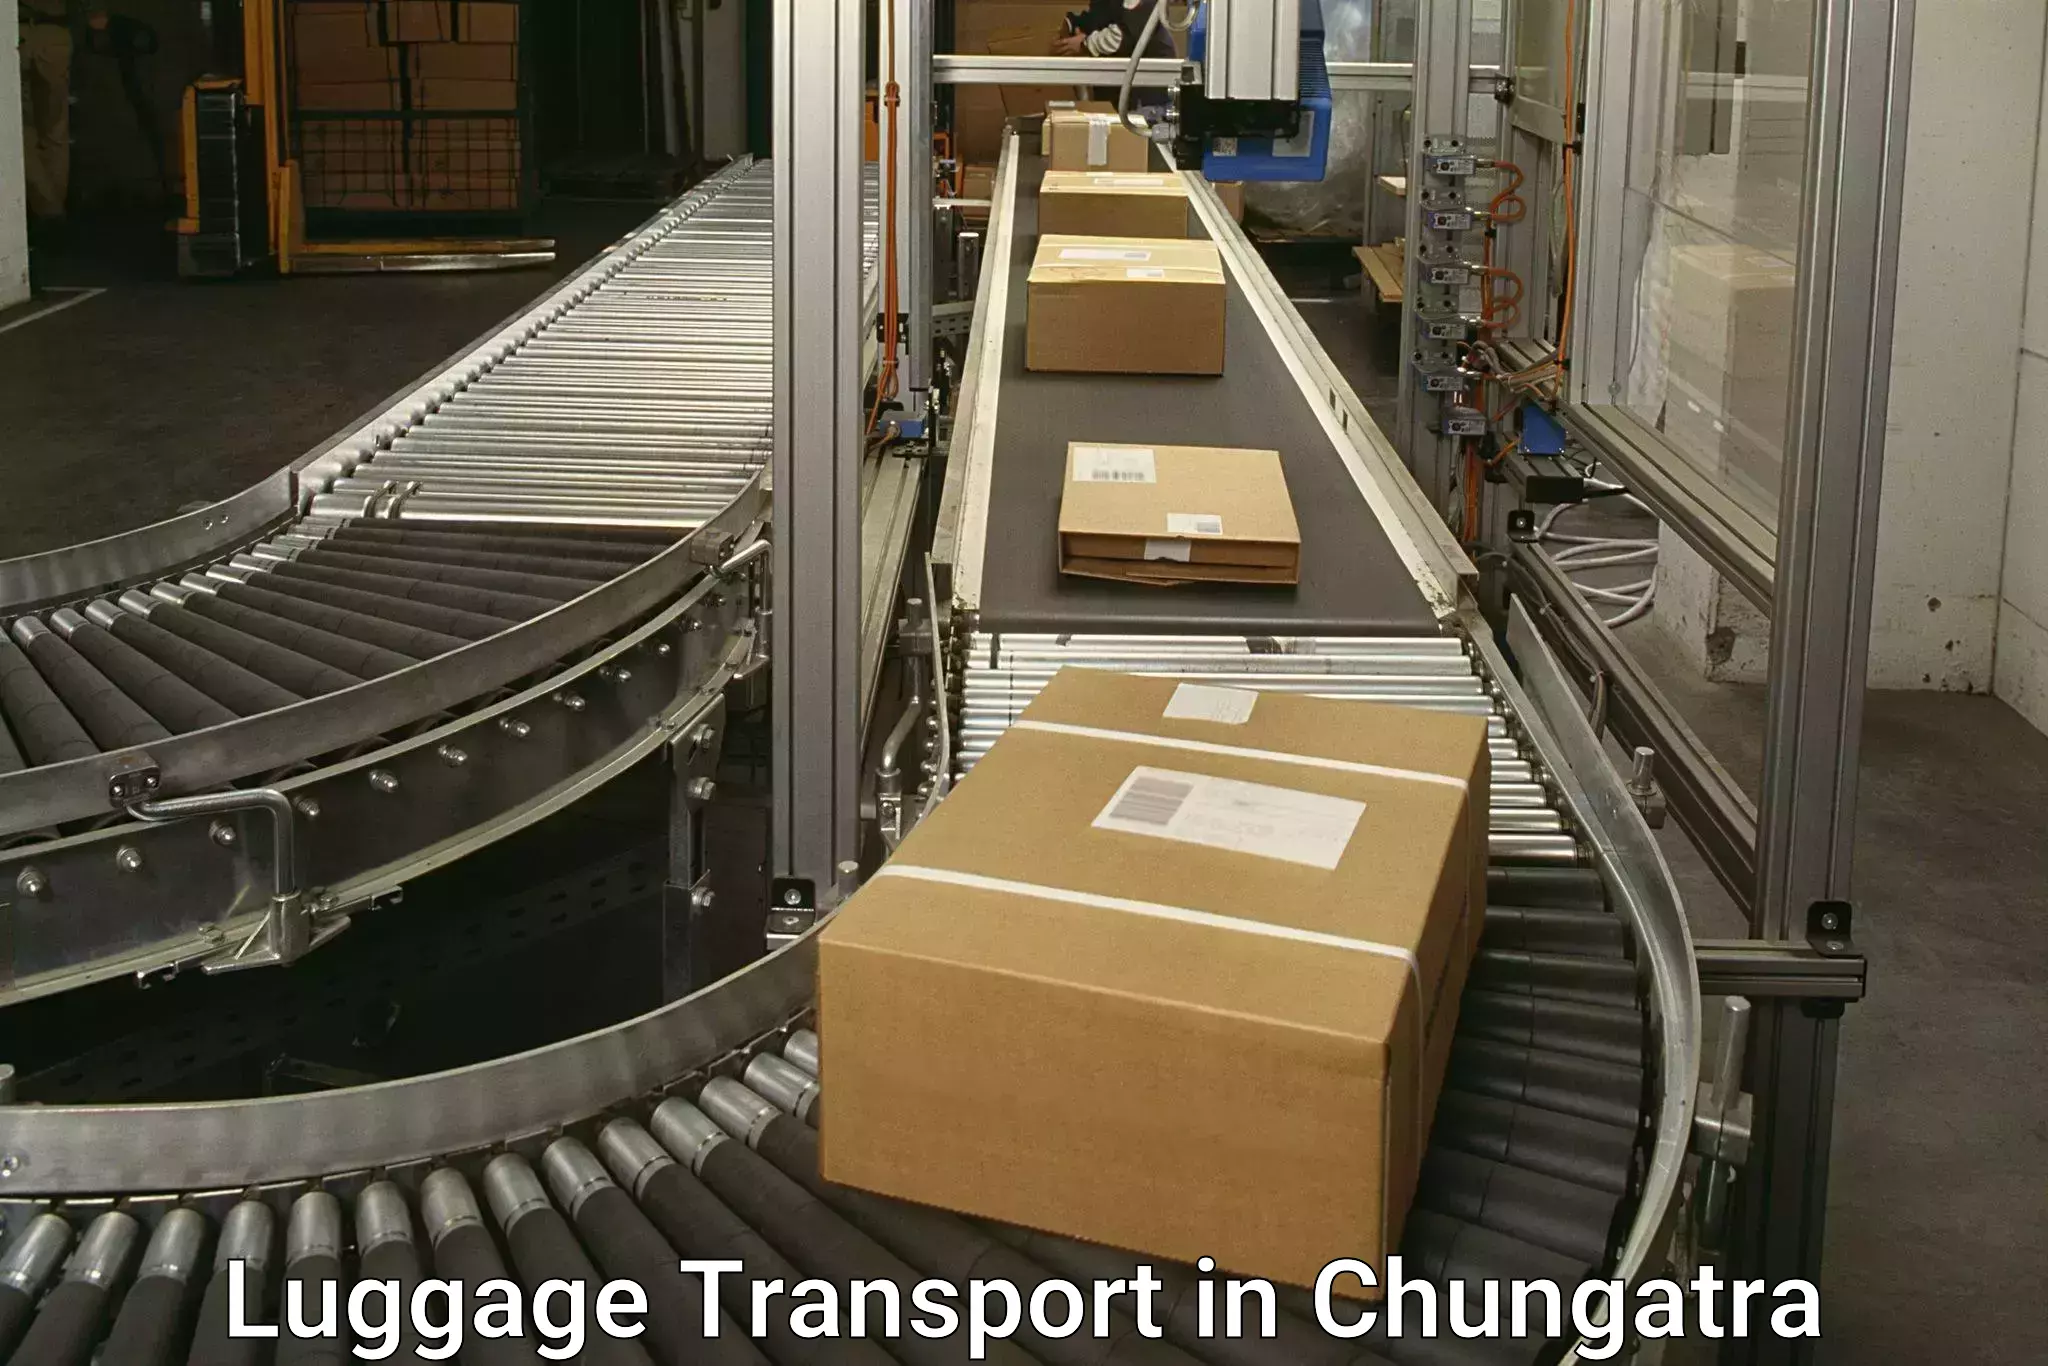 Express luggage delivery in Chungatra